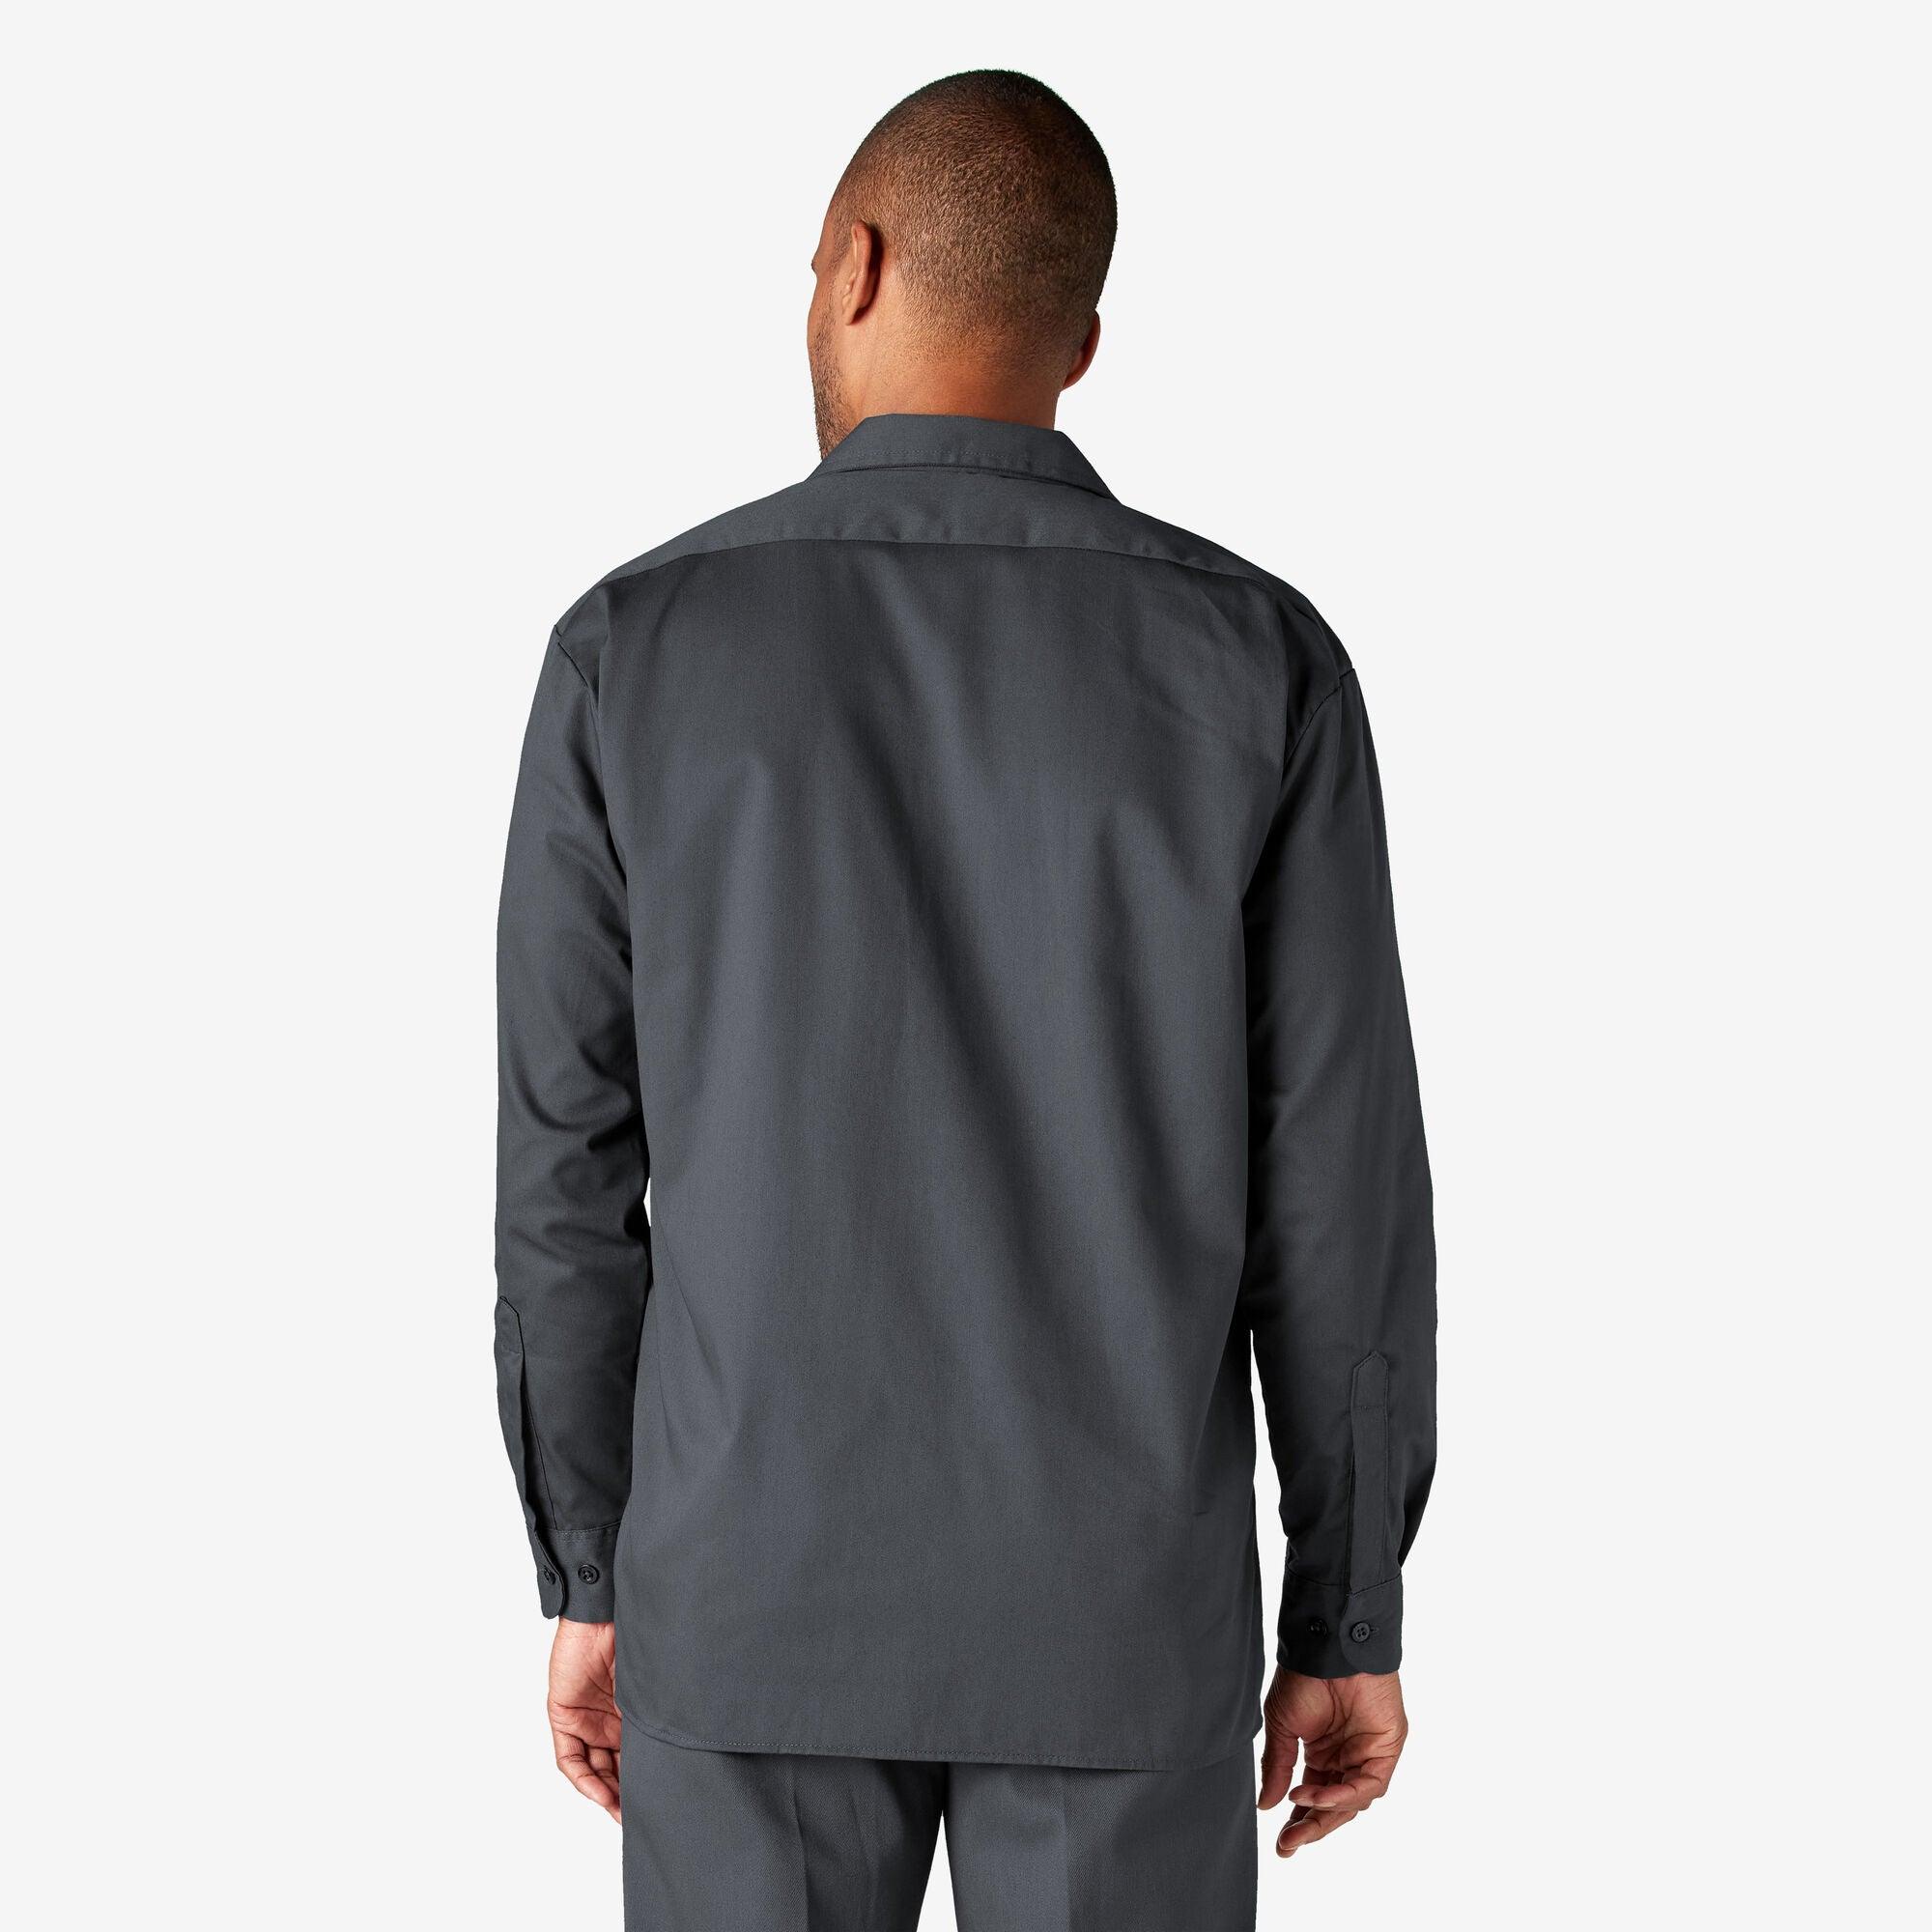 Long Sleeve Work Shirt, Charcoal Gray - Purpose-Built / Home of the Trades